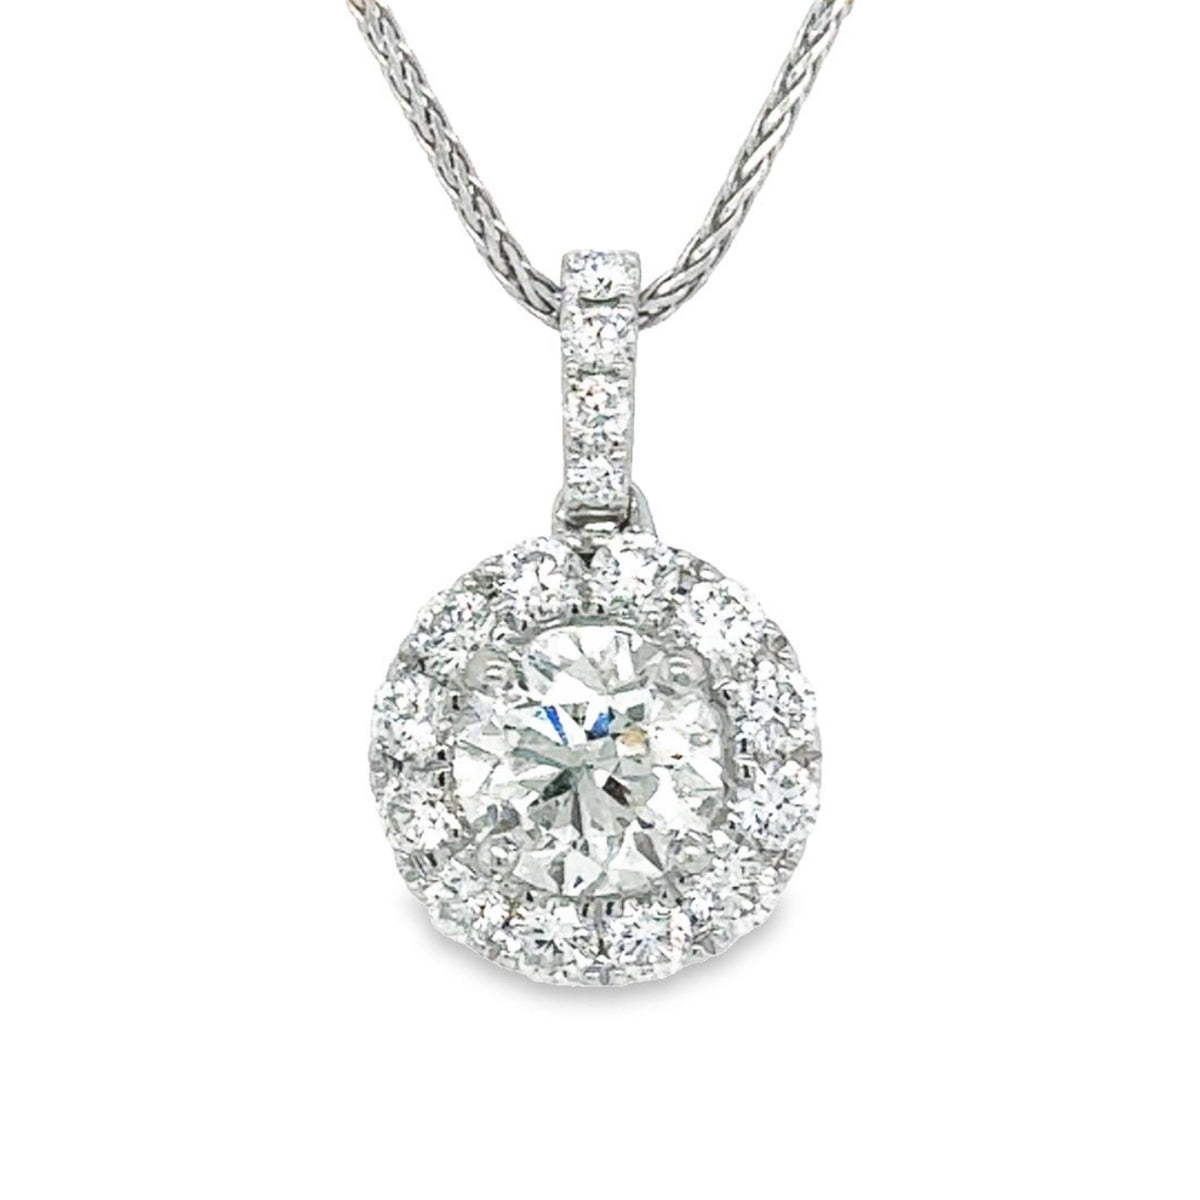 14Kt White Gold Halo Pendant With 1.44cttw Natural Diamonds